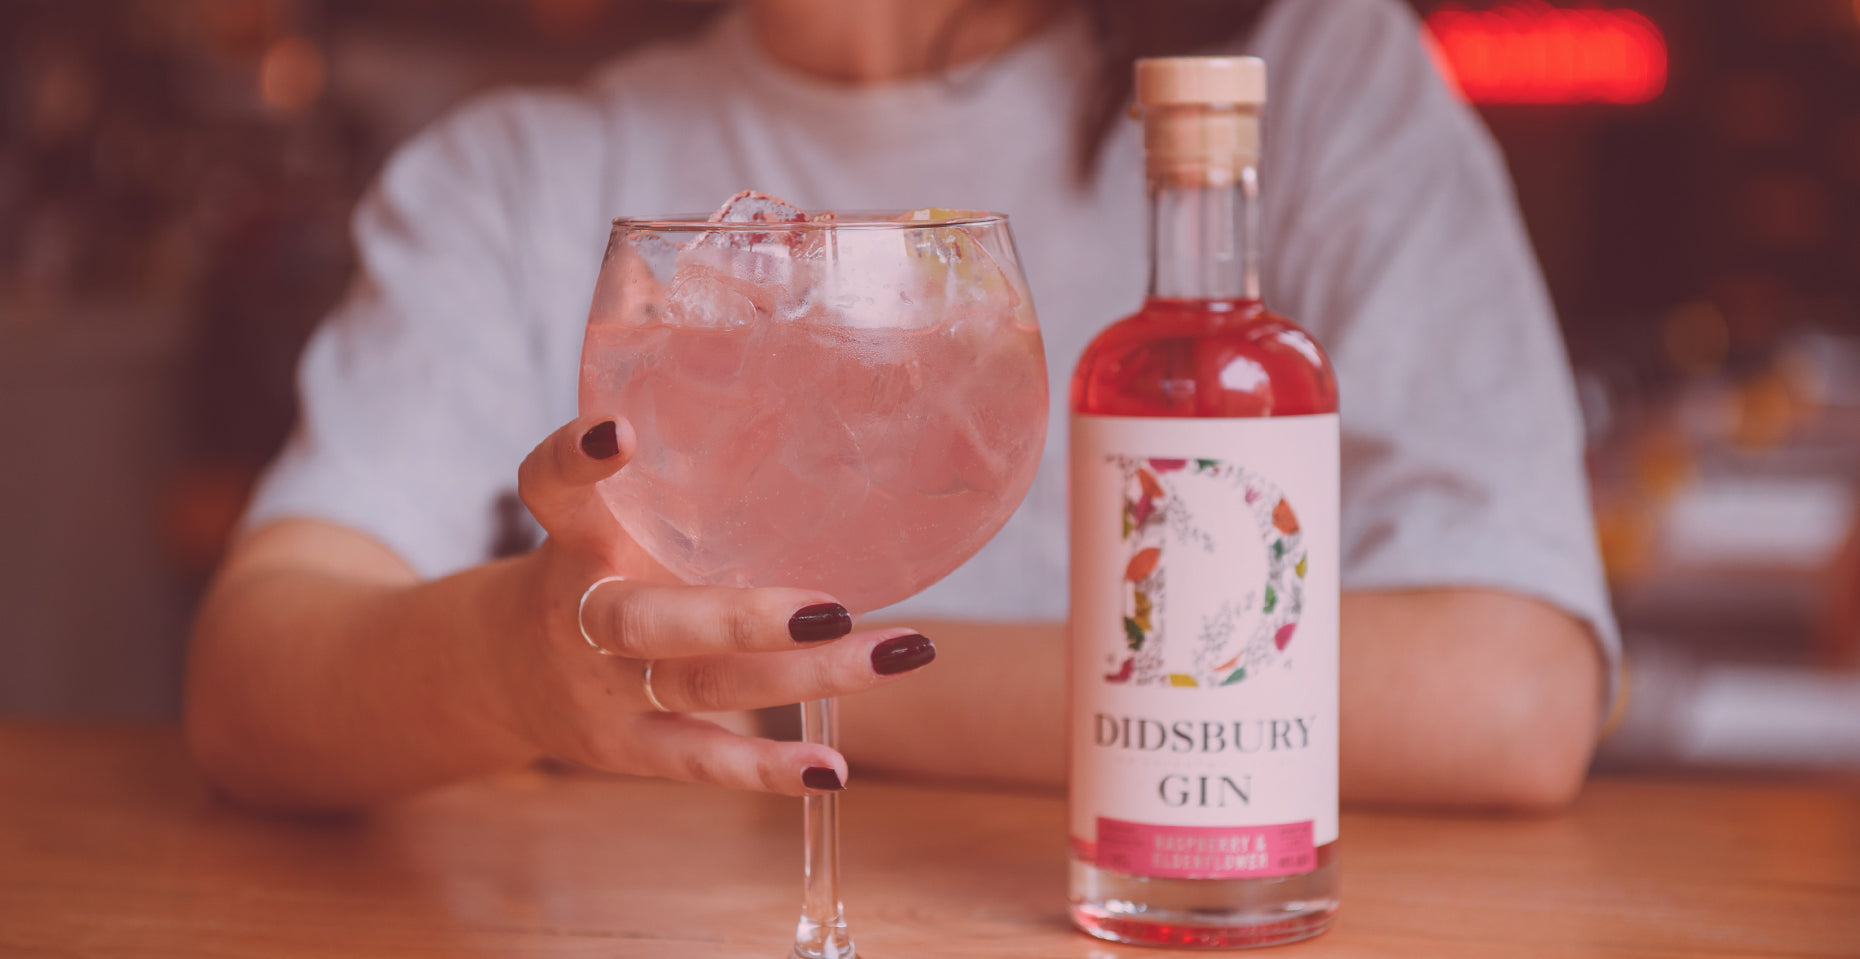 A bottle of Didsbury Gin Raspberry and Elderflower and a cocktail.